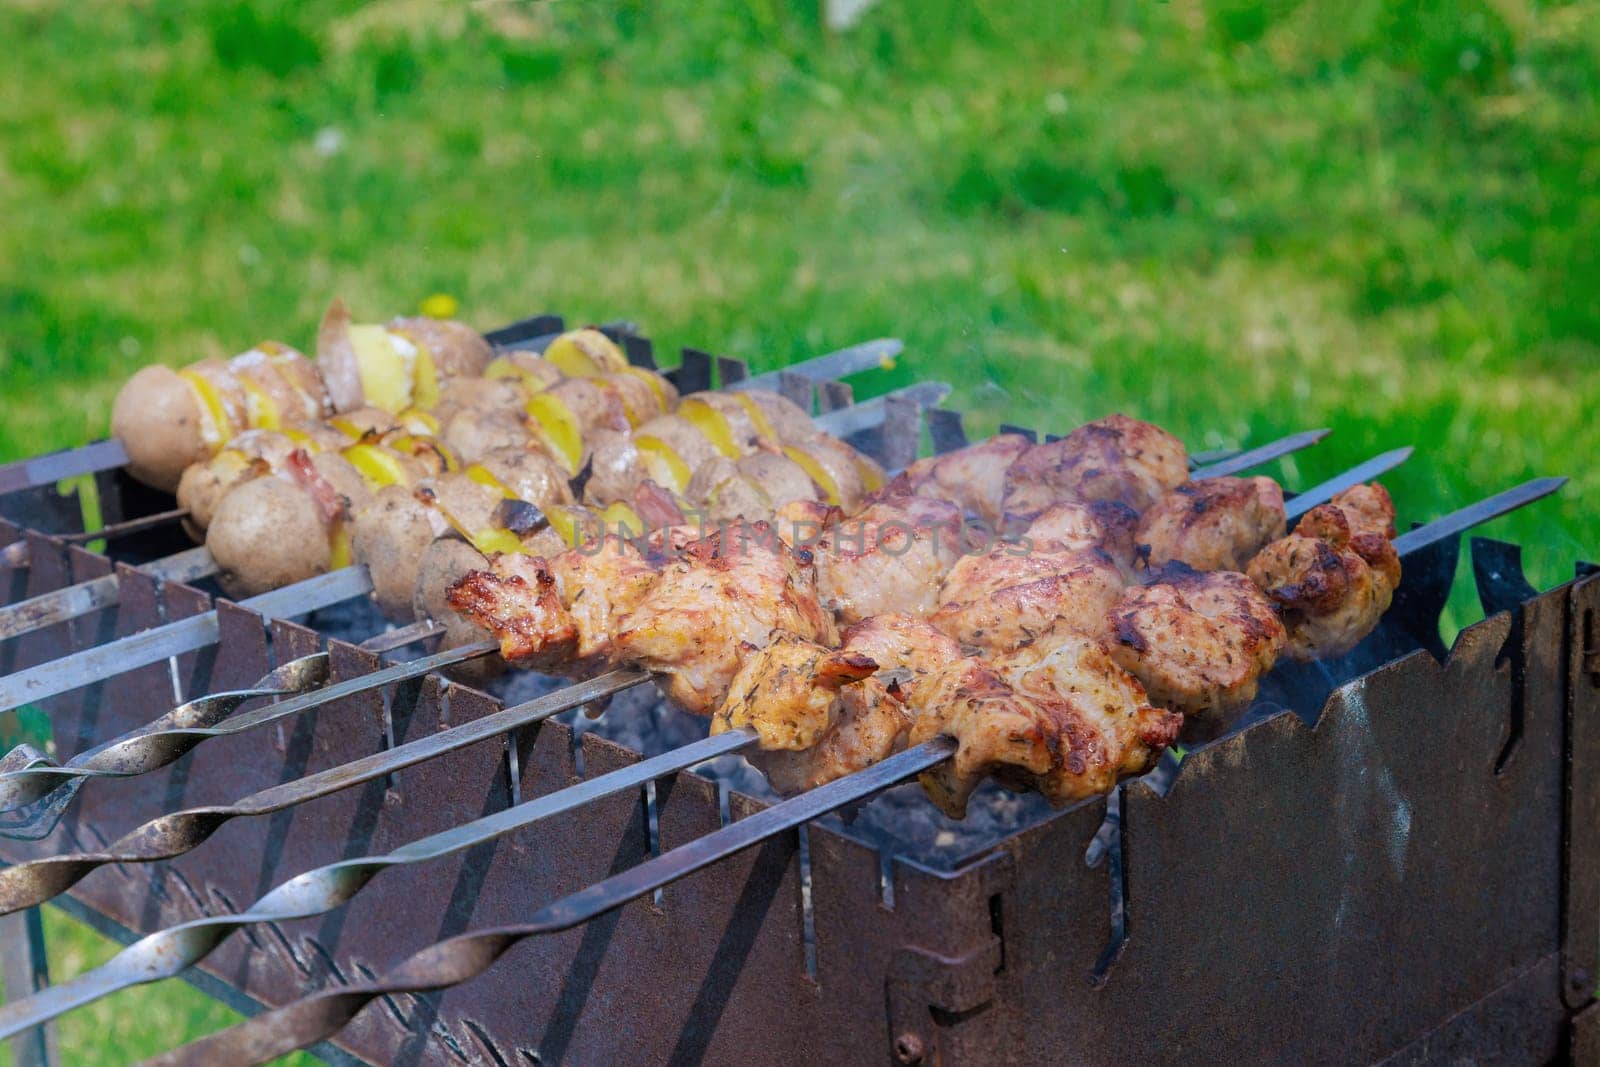 Kebab skewers and potatoes with bacon are grilled on portable metal BBQ brazier